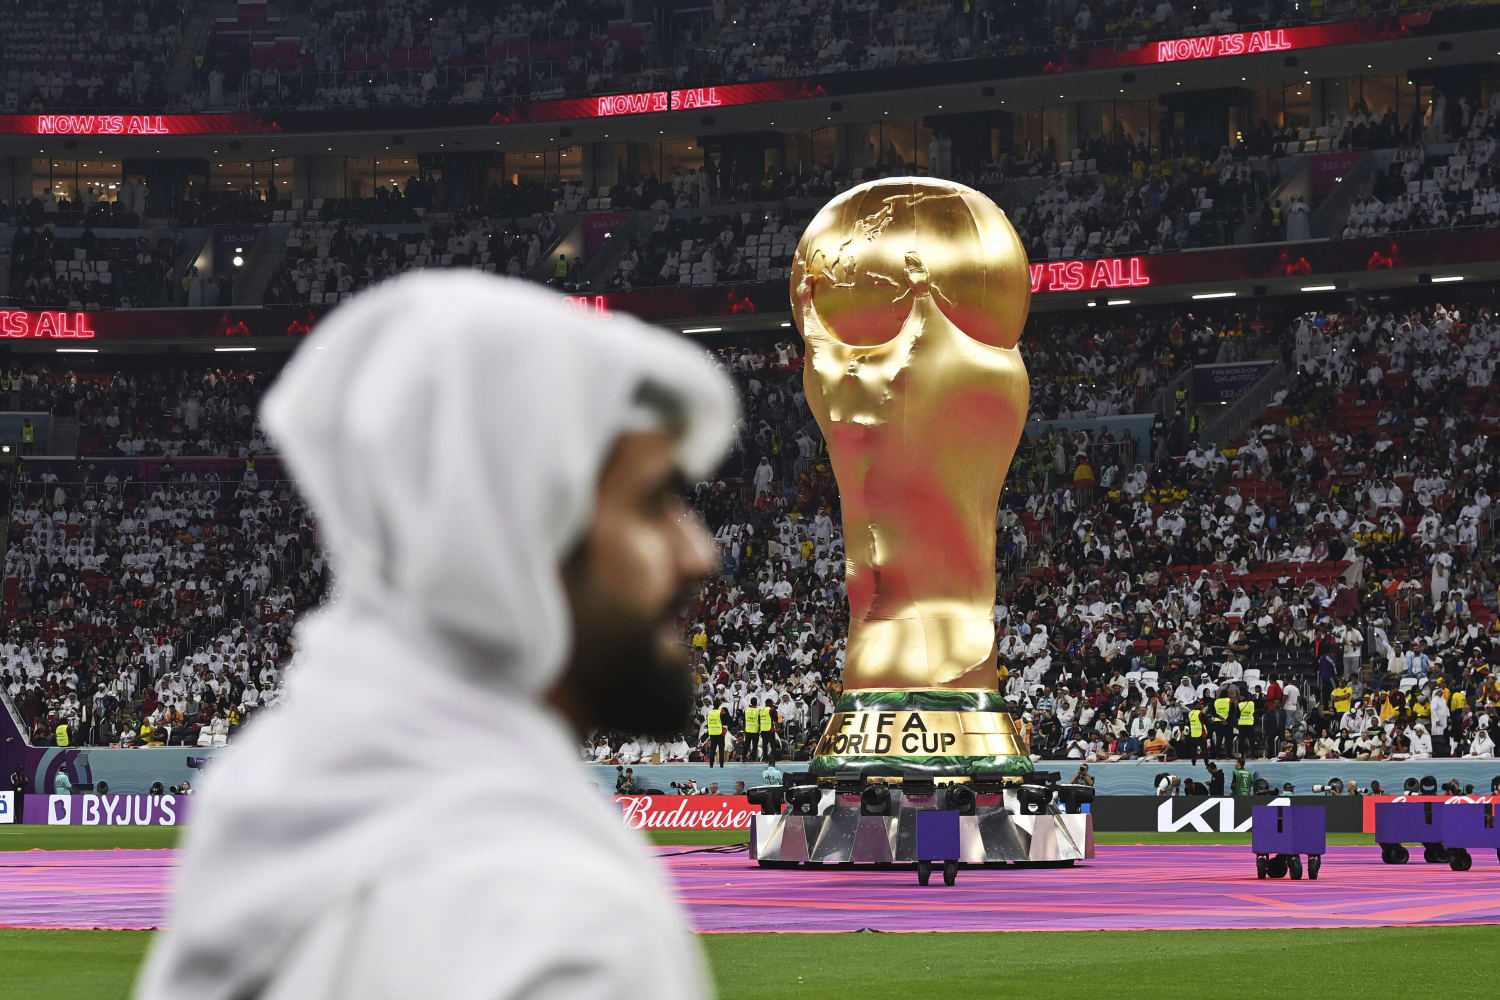 Why Qatar may see the World Cup as a big win despite criticism